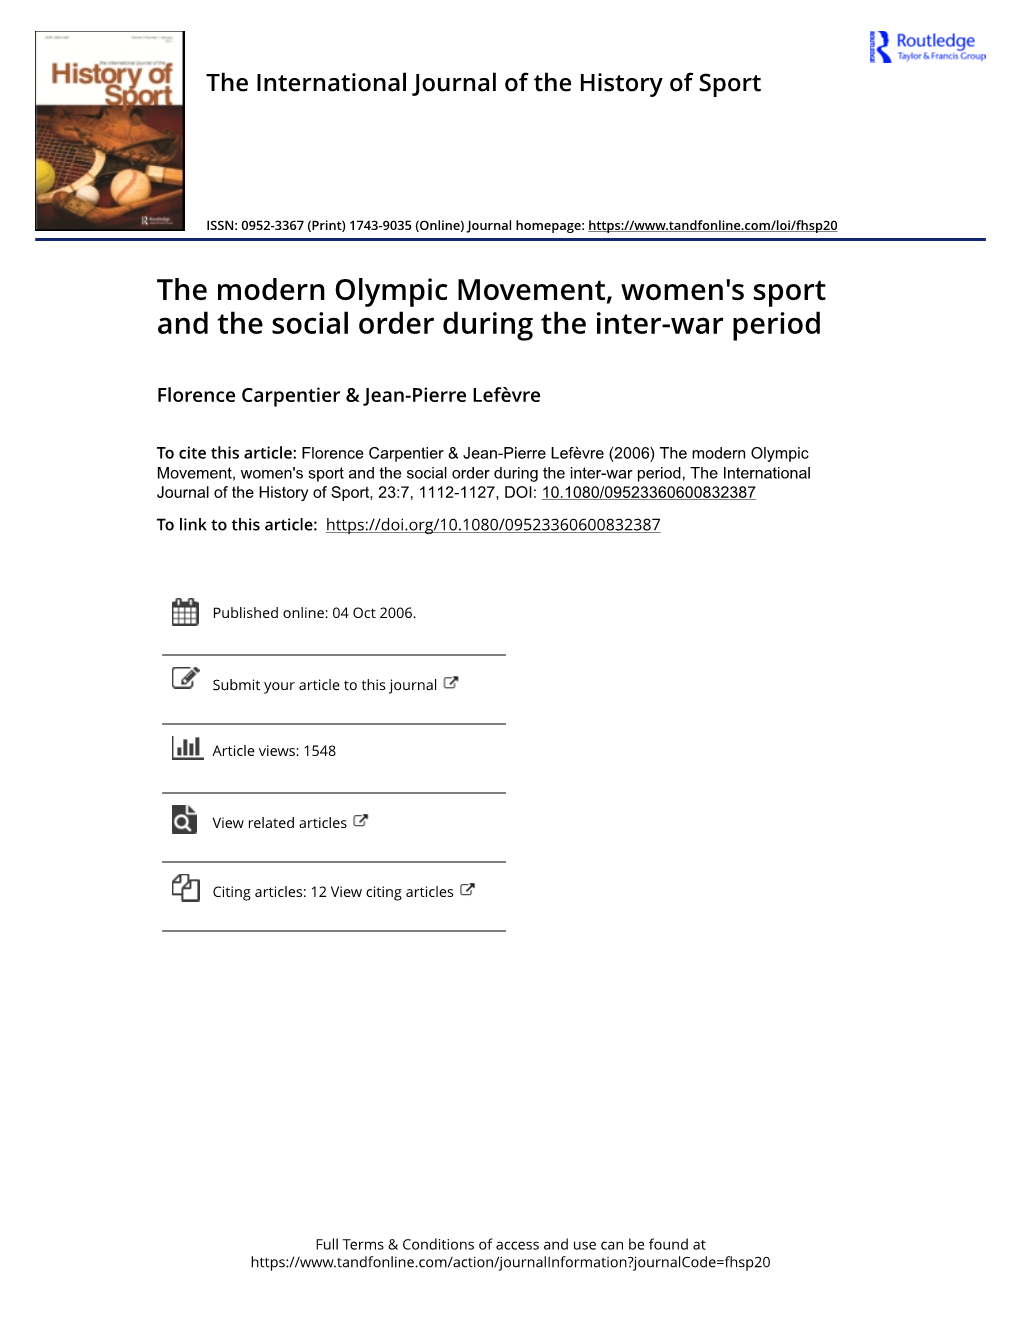 The Modern Olympic Movement, Women's Sport and the Social Order During the Inter-War Period